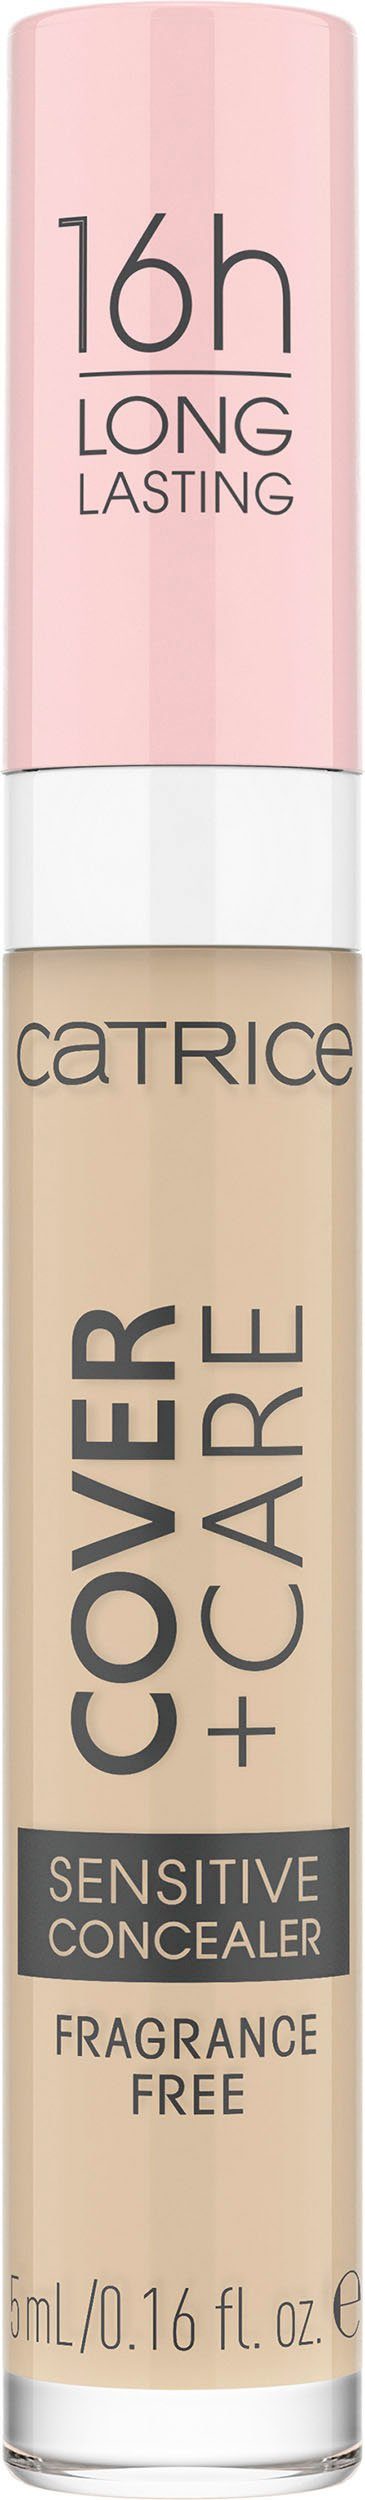 Catrice Concealer Catrice Sensitive 010C Care Cover nude Concealer, 3-tlg. 